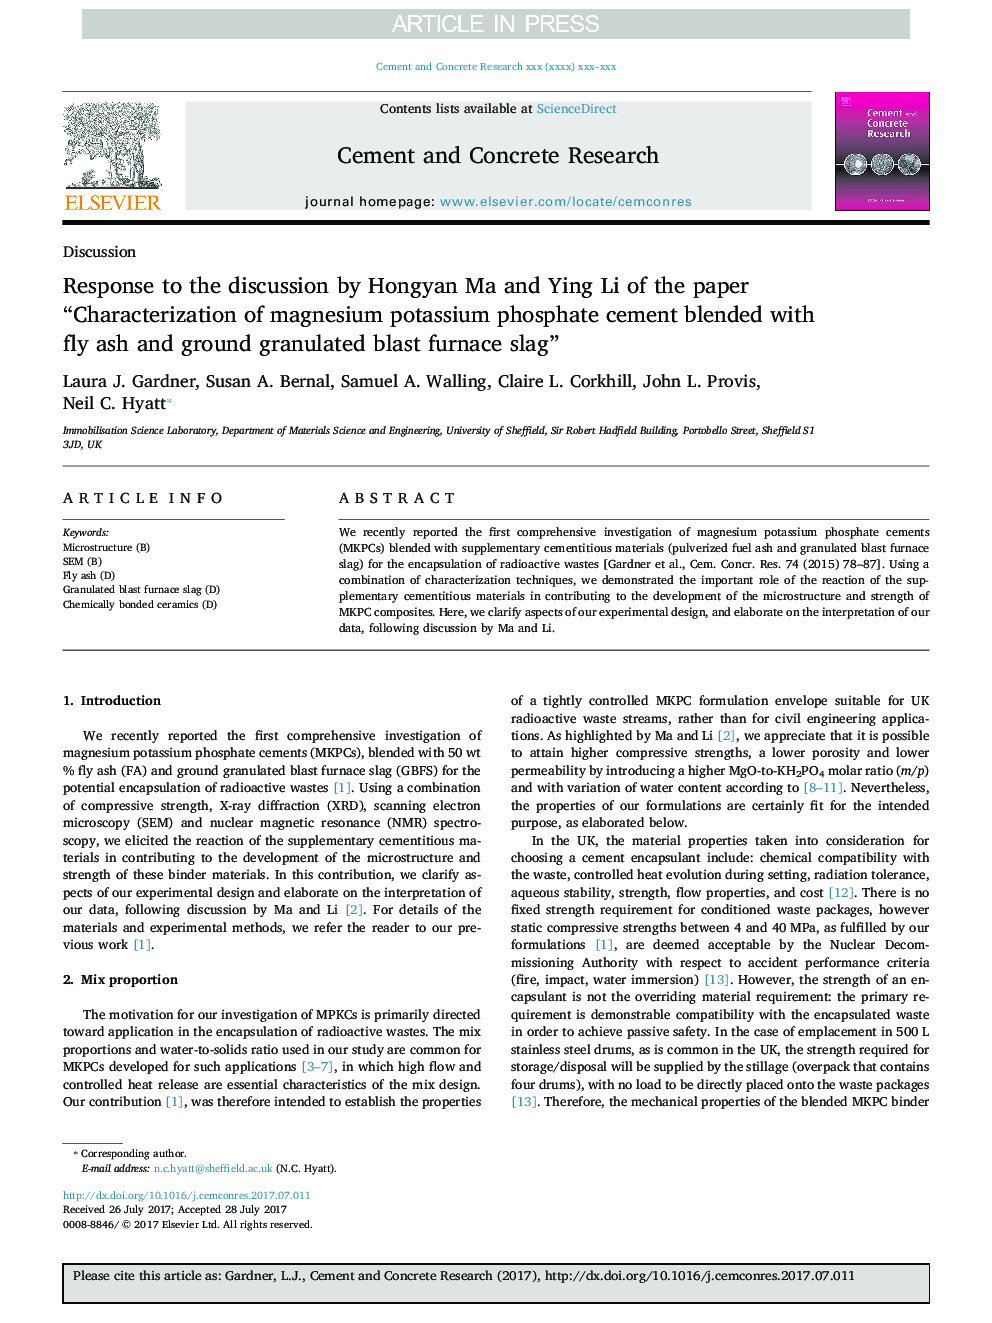 Response to the discussion by Hongyan Ma and Ying Li of the paper “Characterization of magnesium potassium phosphate cement blended with fly ash and ground granulated blast furnace slag”